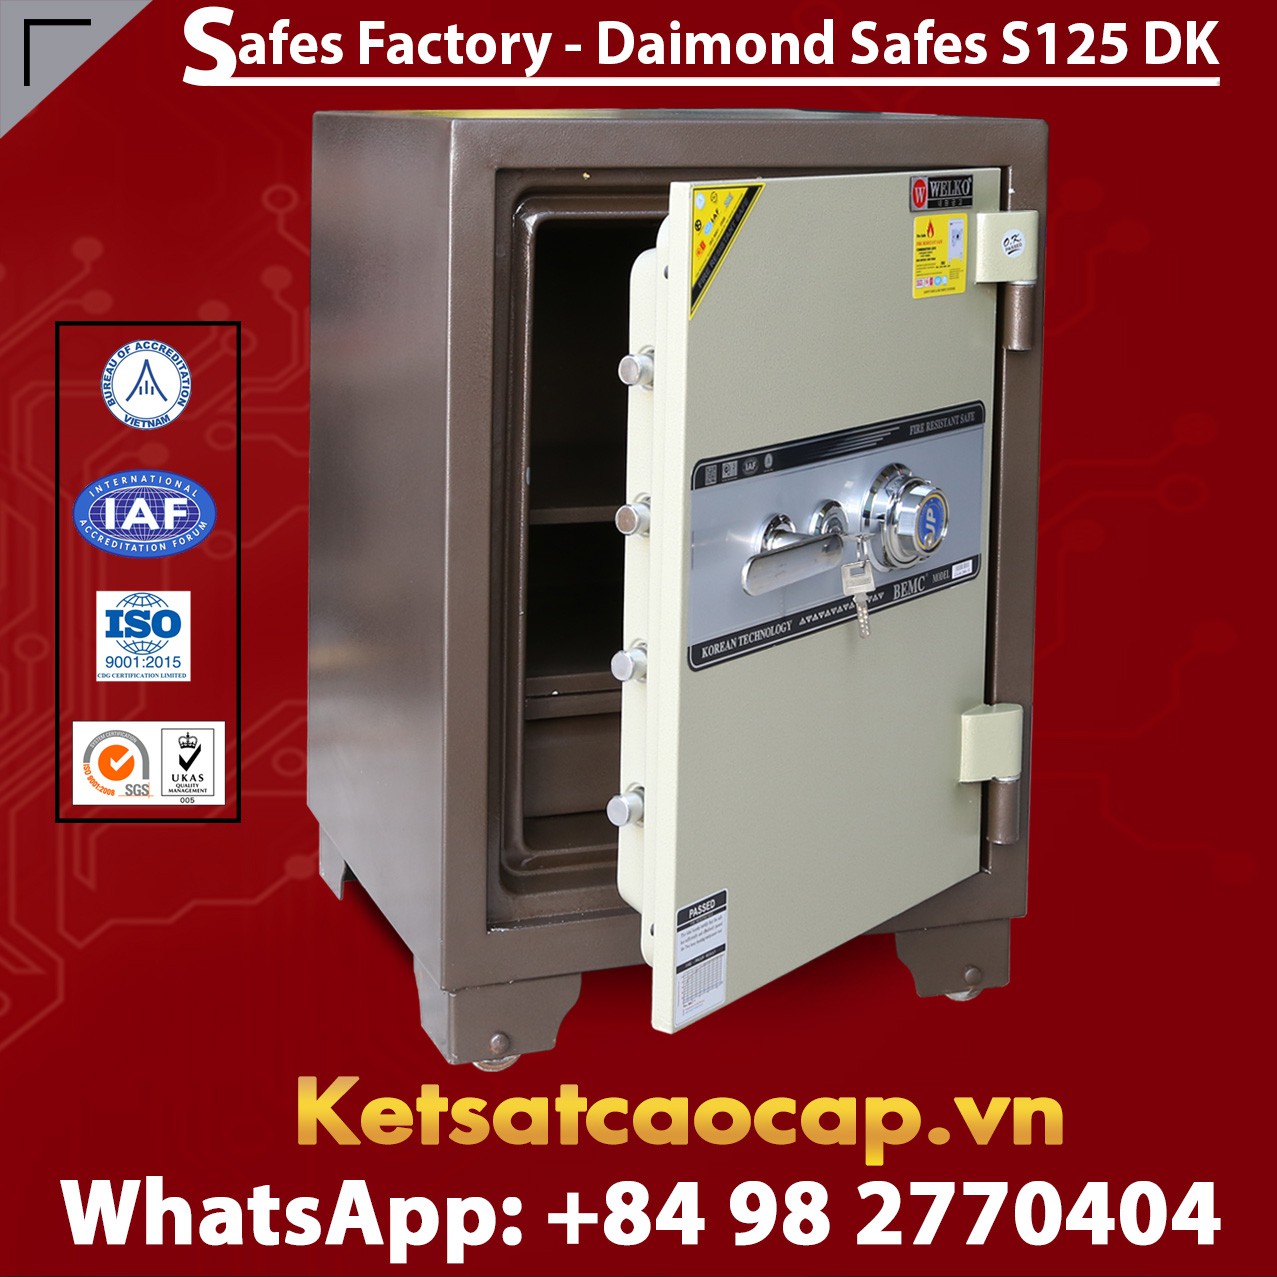 Office Safes Manufacturers cao cấp